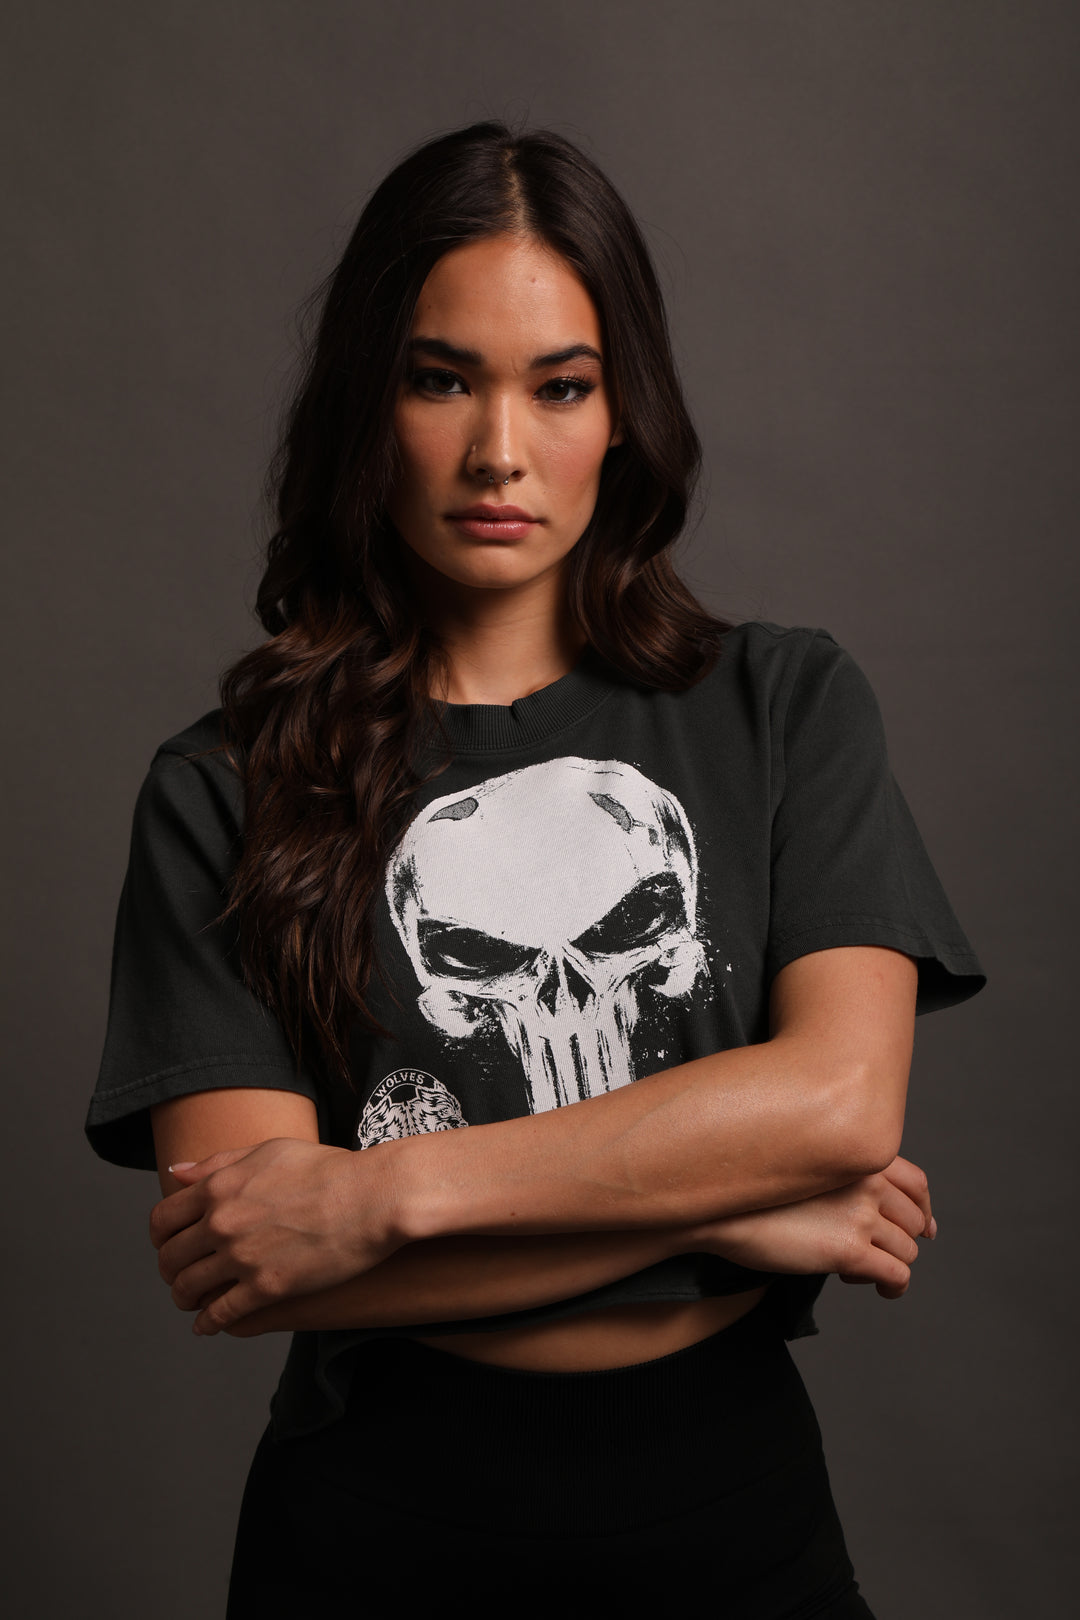 Punisher "Premium" (Cropped) Tee in Castle Gray